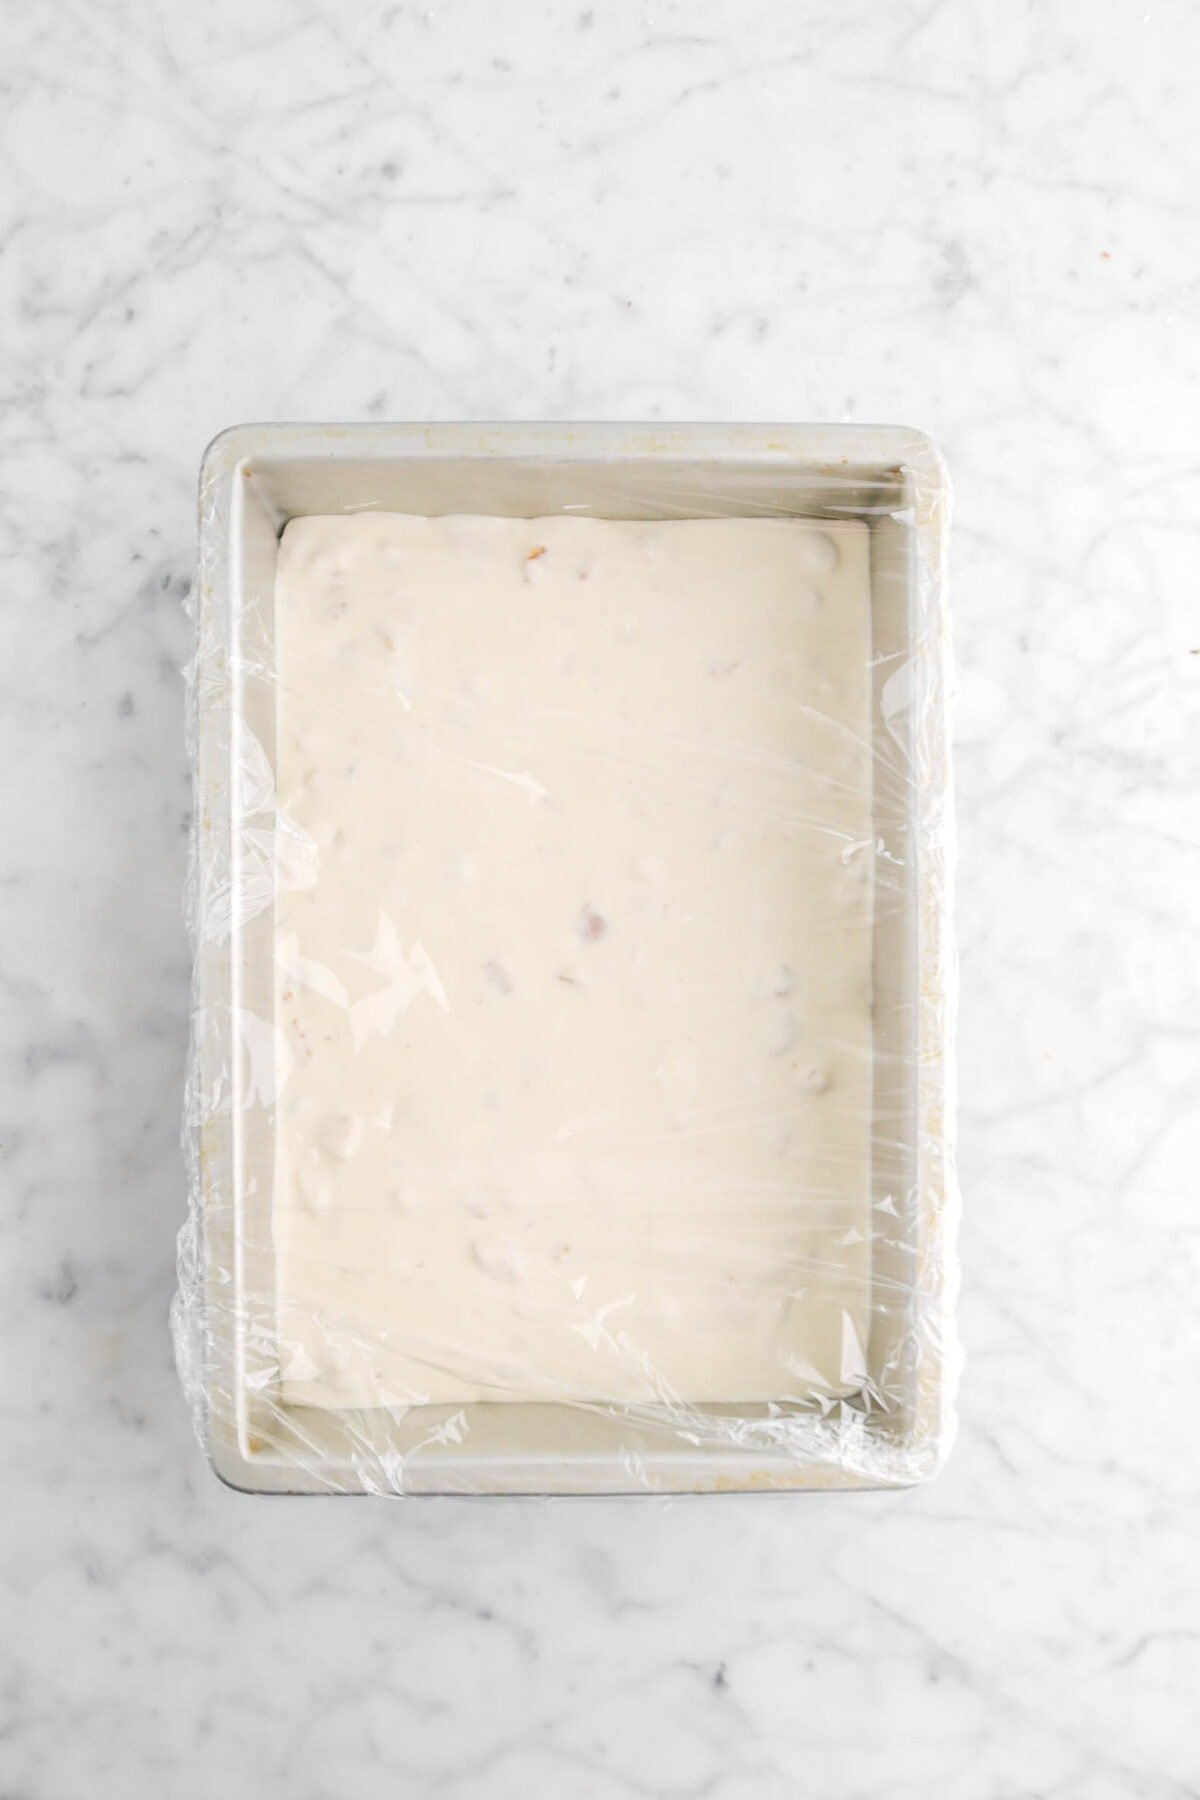 ice cream in sheet pan covered with plastic wrap